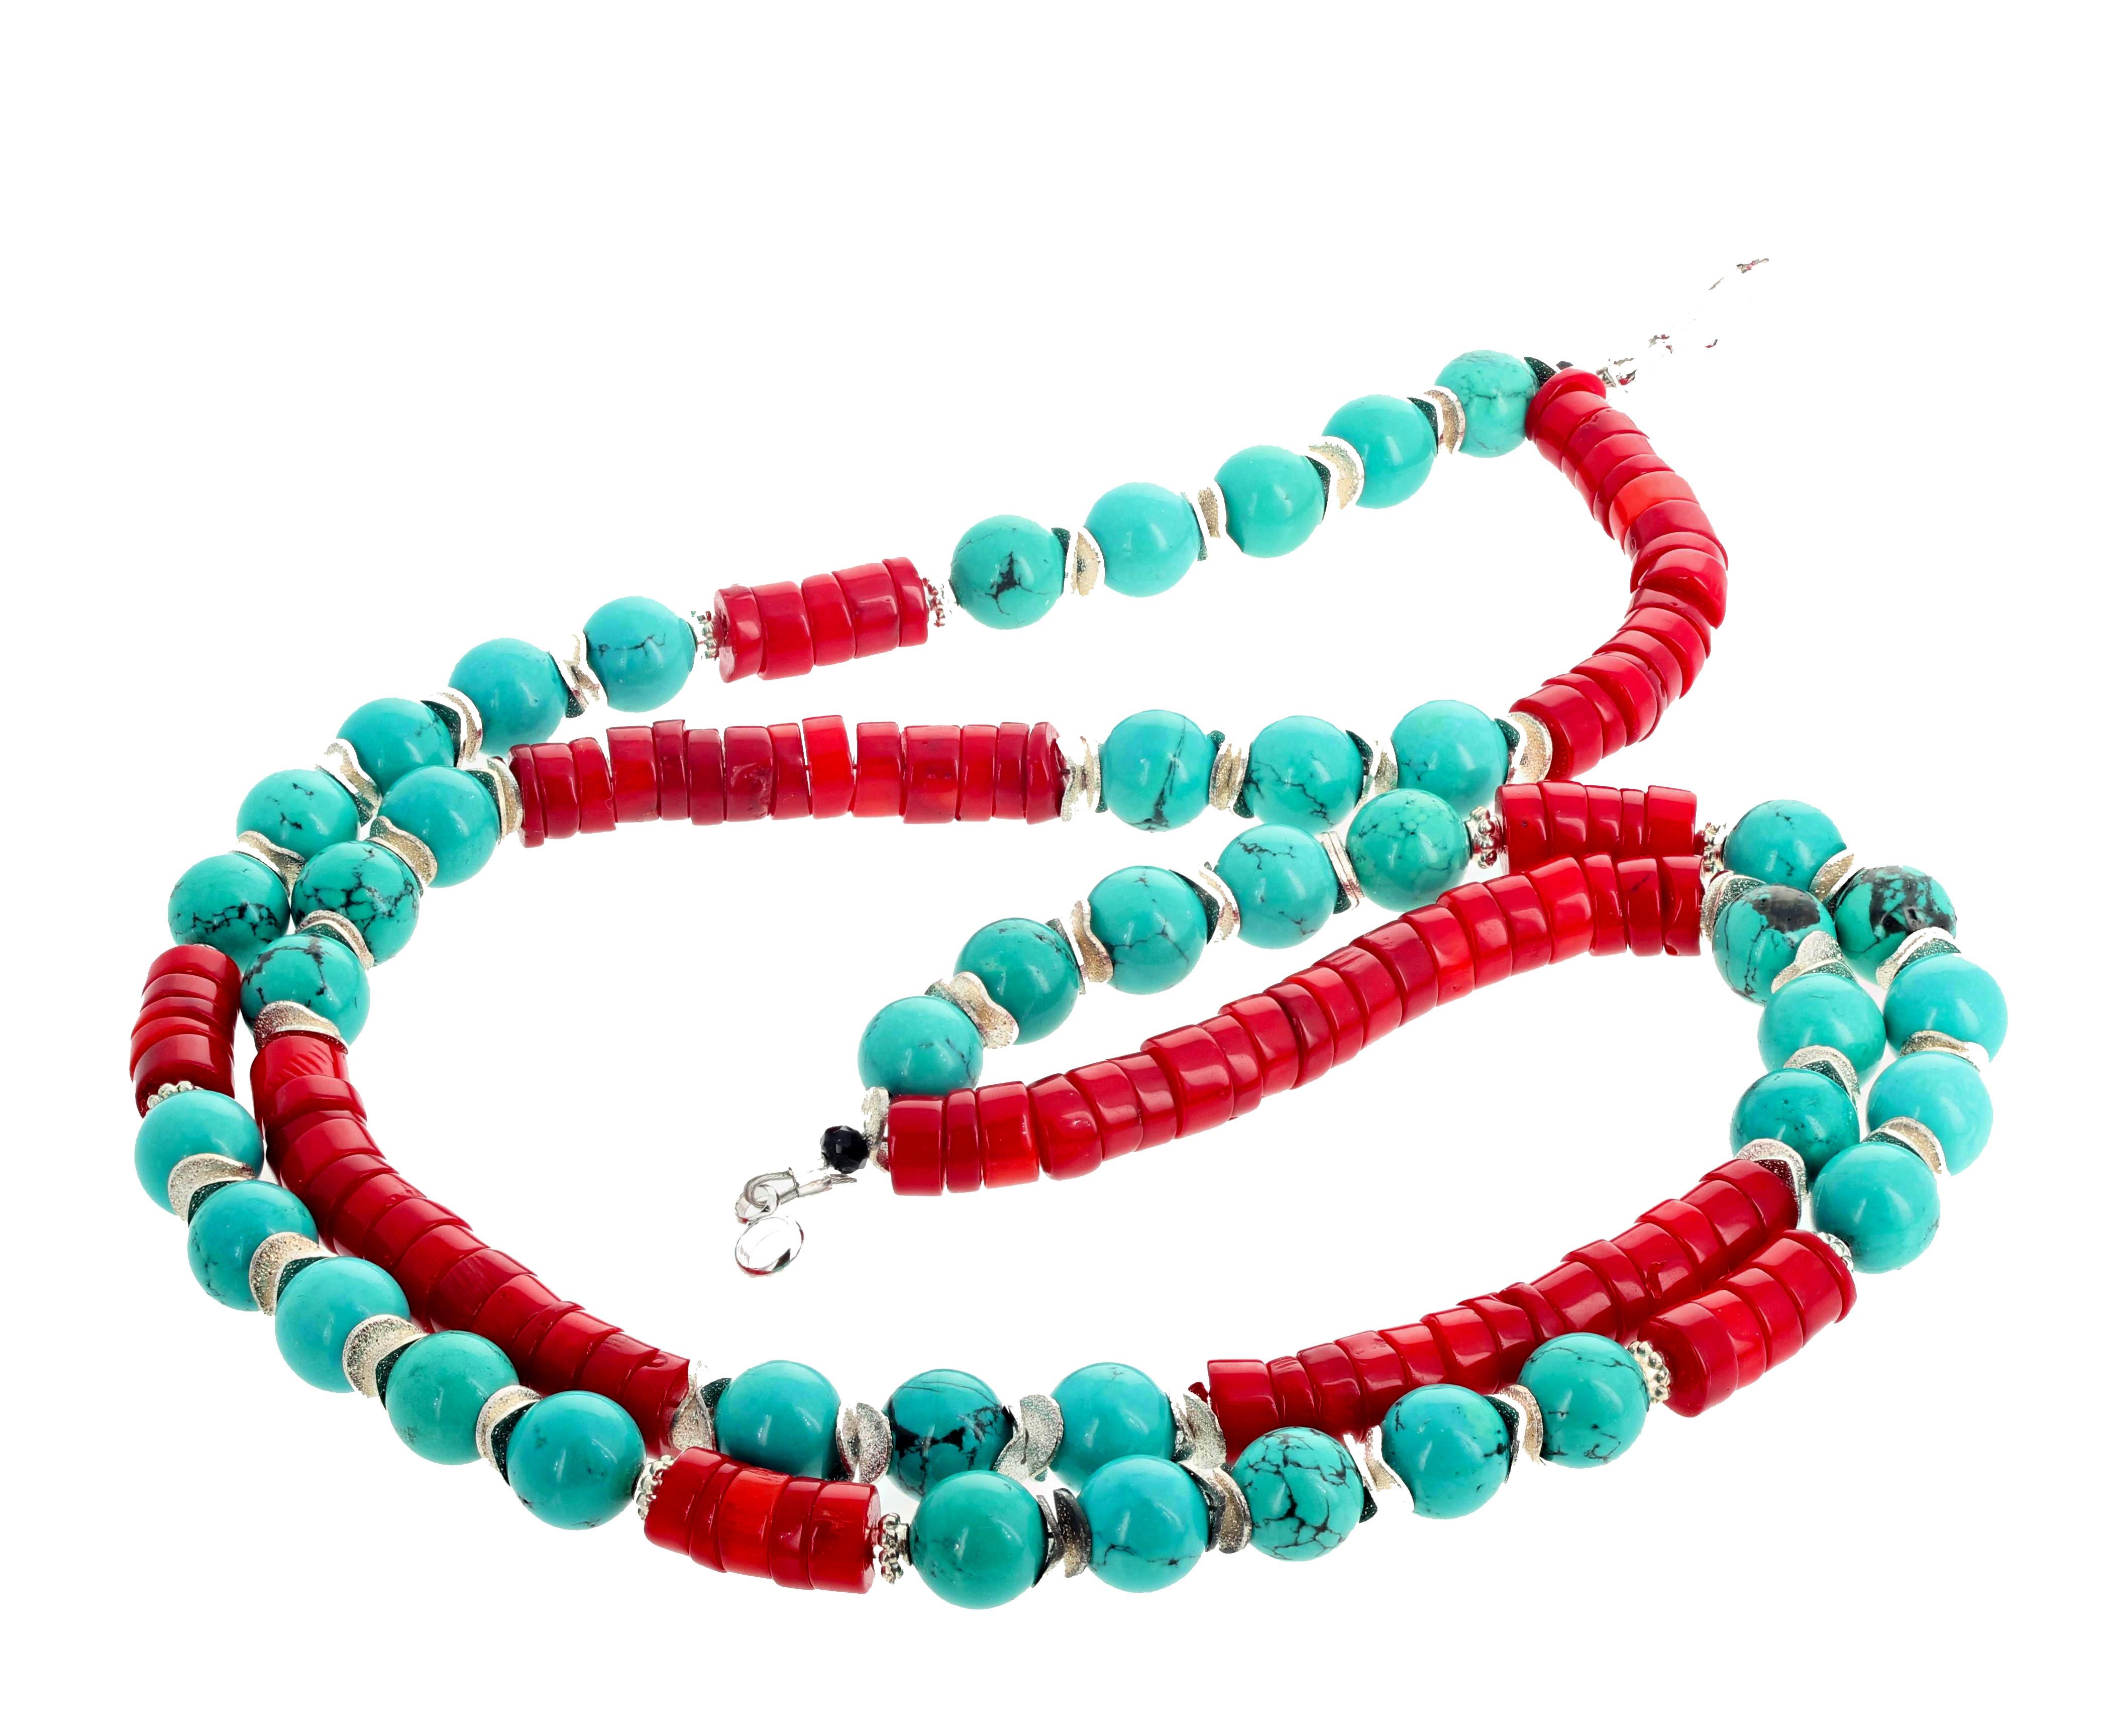 Gemjunky BoHo Chic Turquoise and Red Bamboo Coral Double Strand Necklace im Zustand „Neu“ in Raleigh, NC